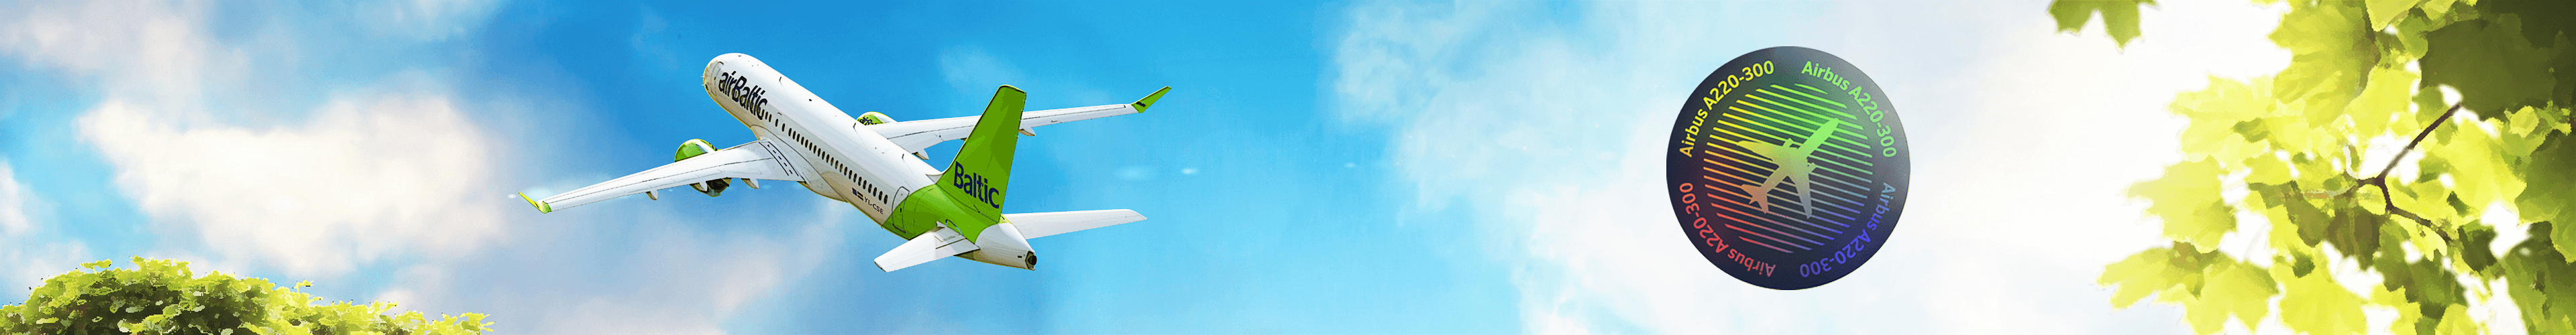 airBaltic banner